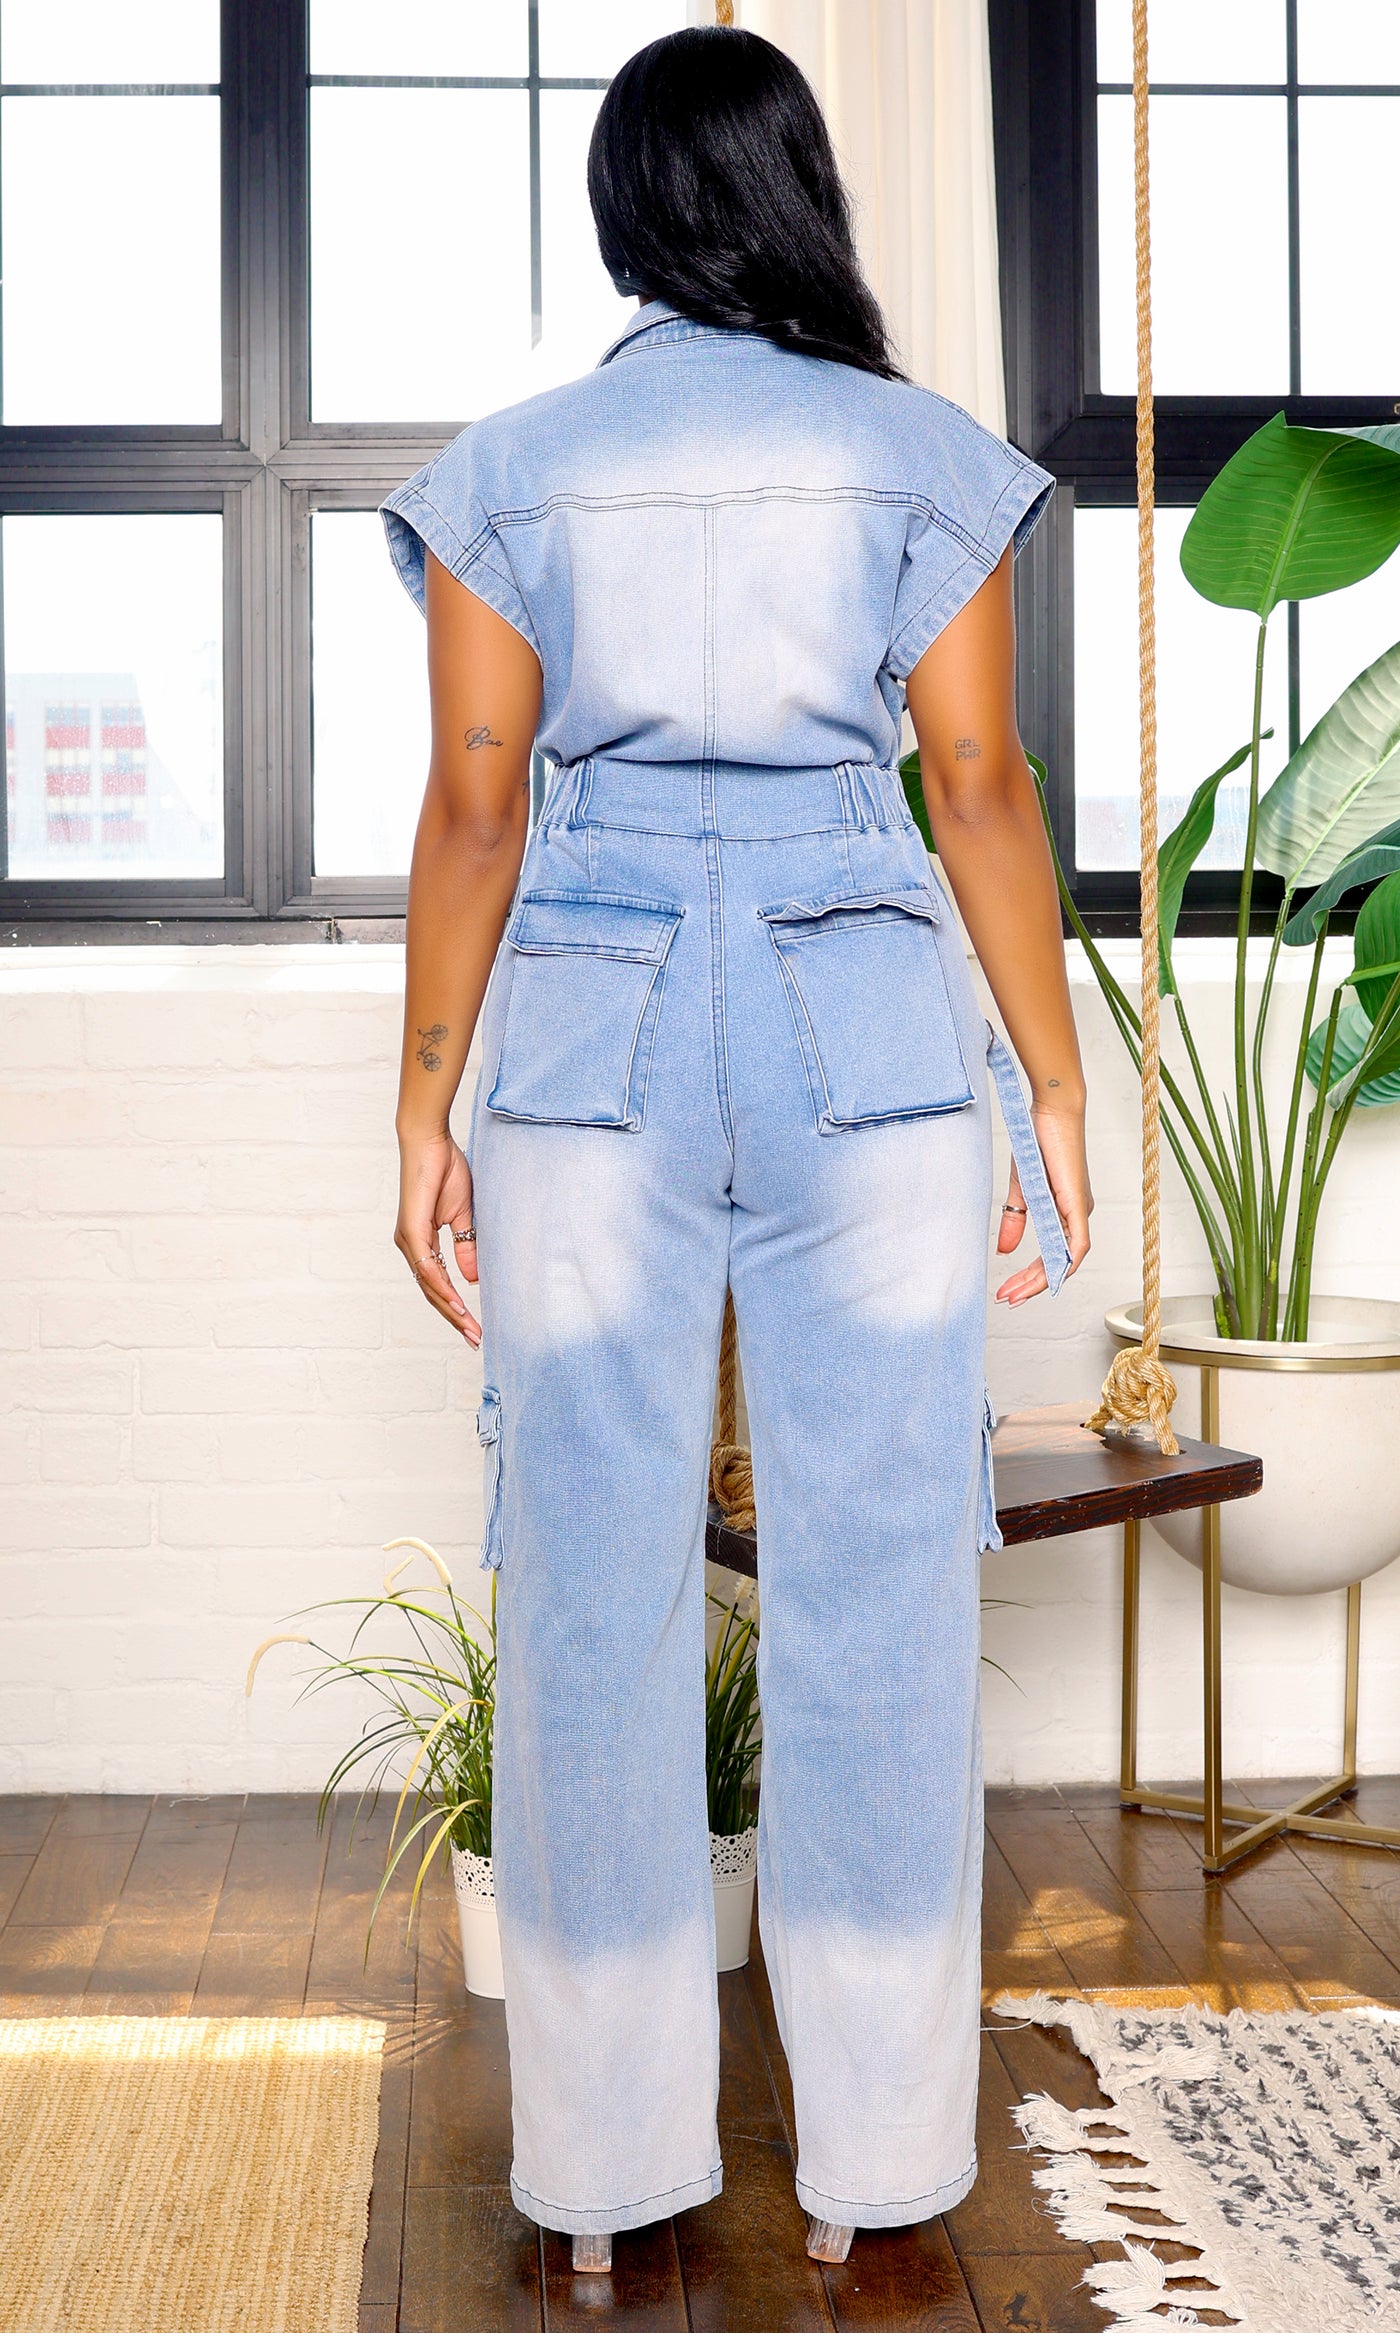 Short Sleeve Cargo Denim Jumpsuit - Light Blue  PREORDER Ships Early July - Cutely Covered